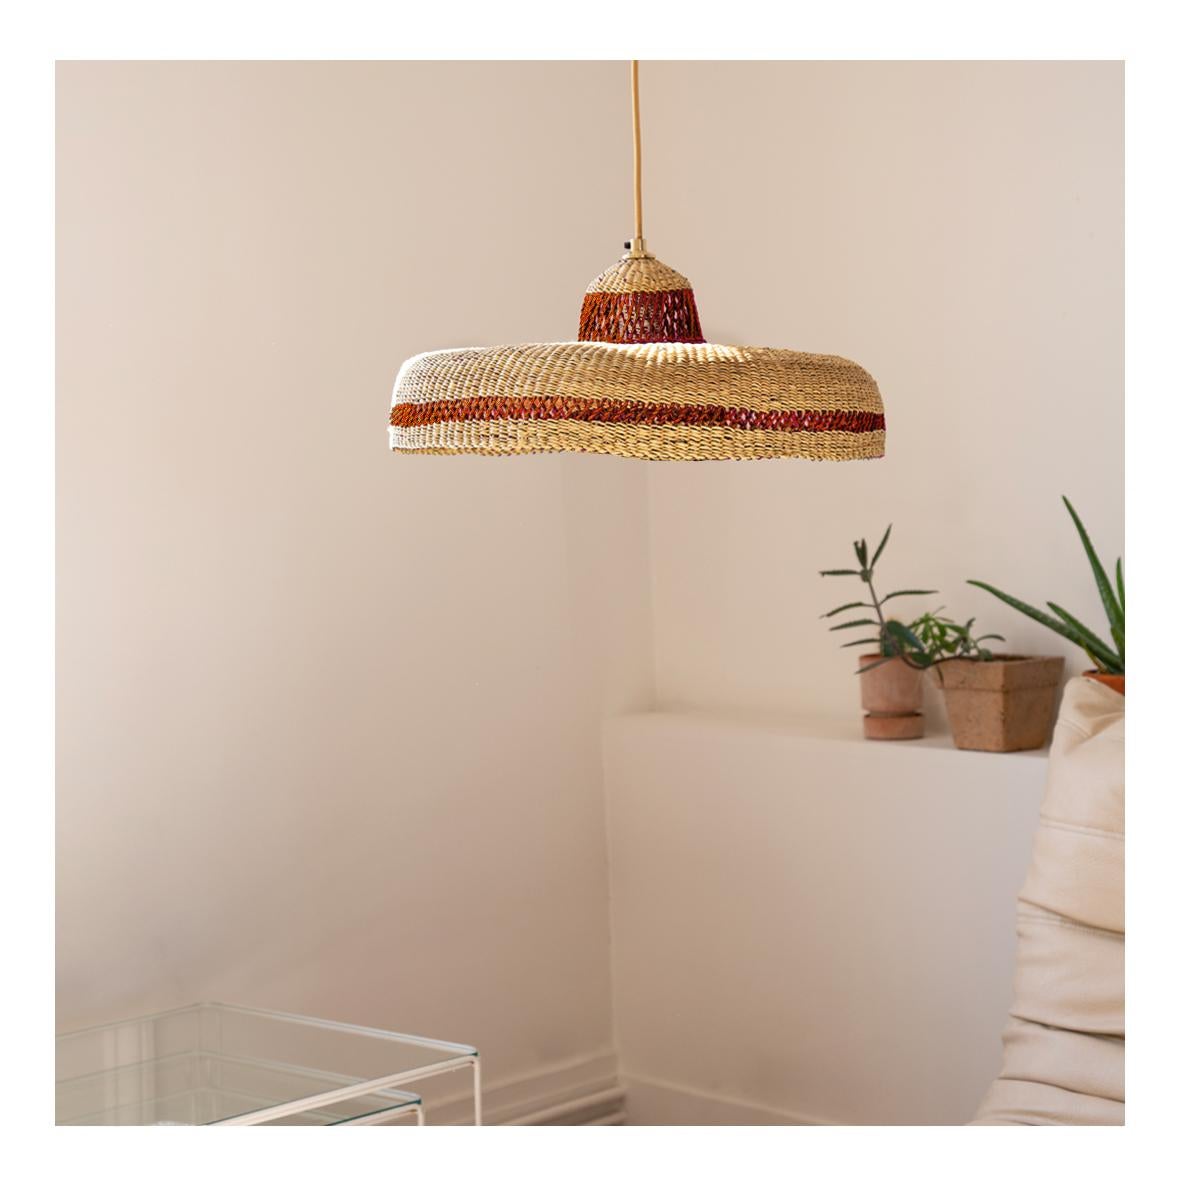 Medium Woven Pendant Lamp HATTER : 
Dynamic and natural
Colour: Natural and Ginger (Terracotta)

Are you looking for a contemporary natural centrepiece for your room? We can offer you the perfect balance of earthy and refined with our medium